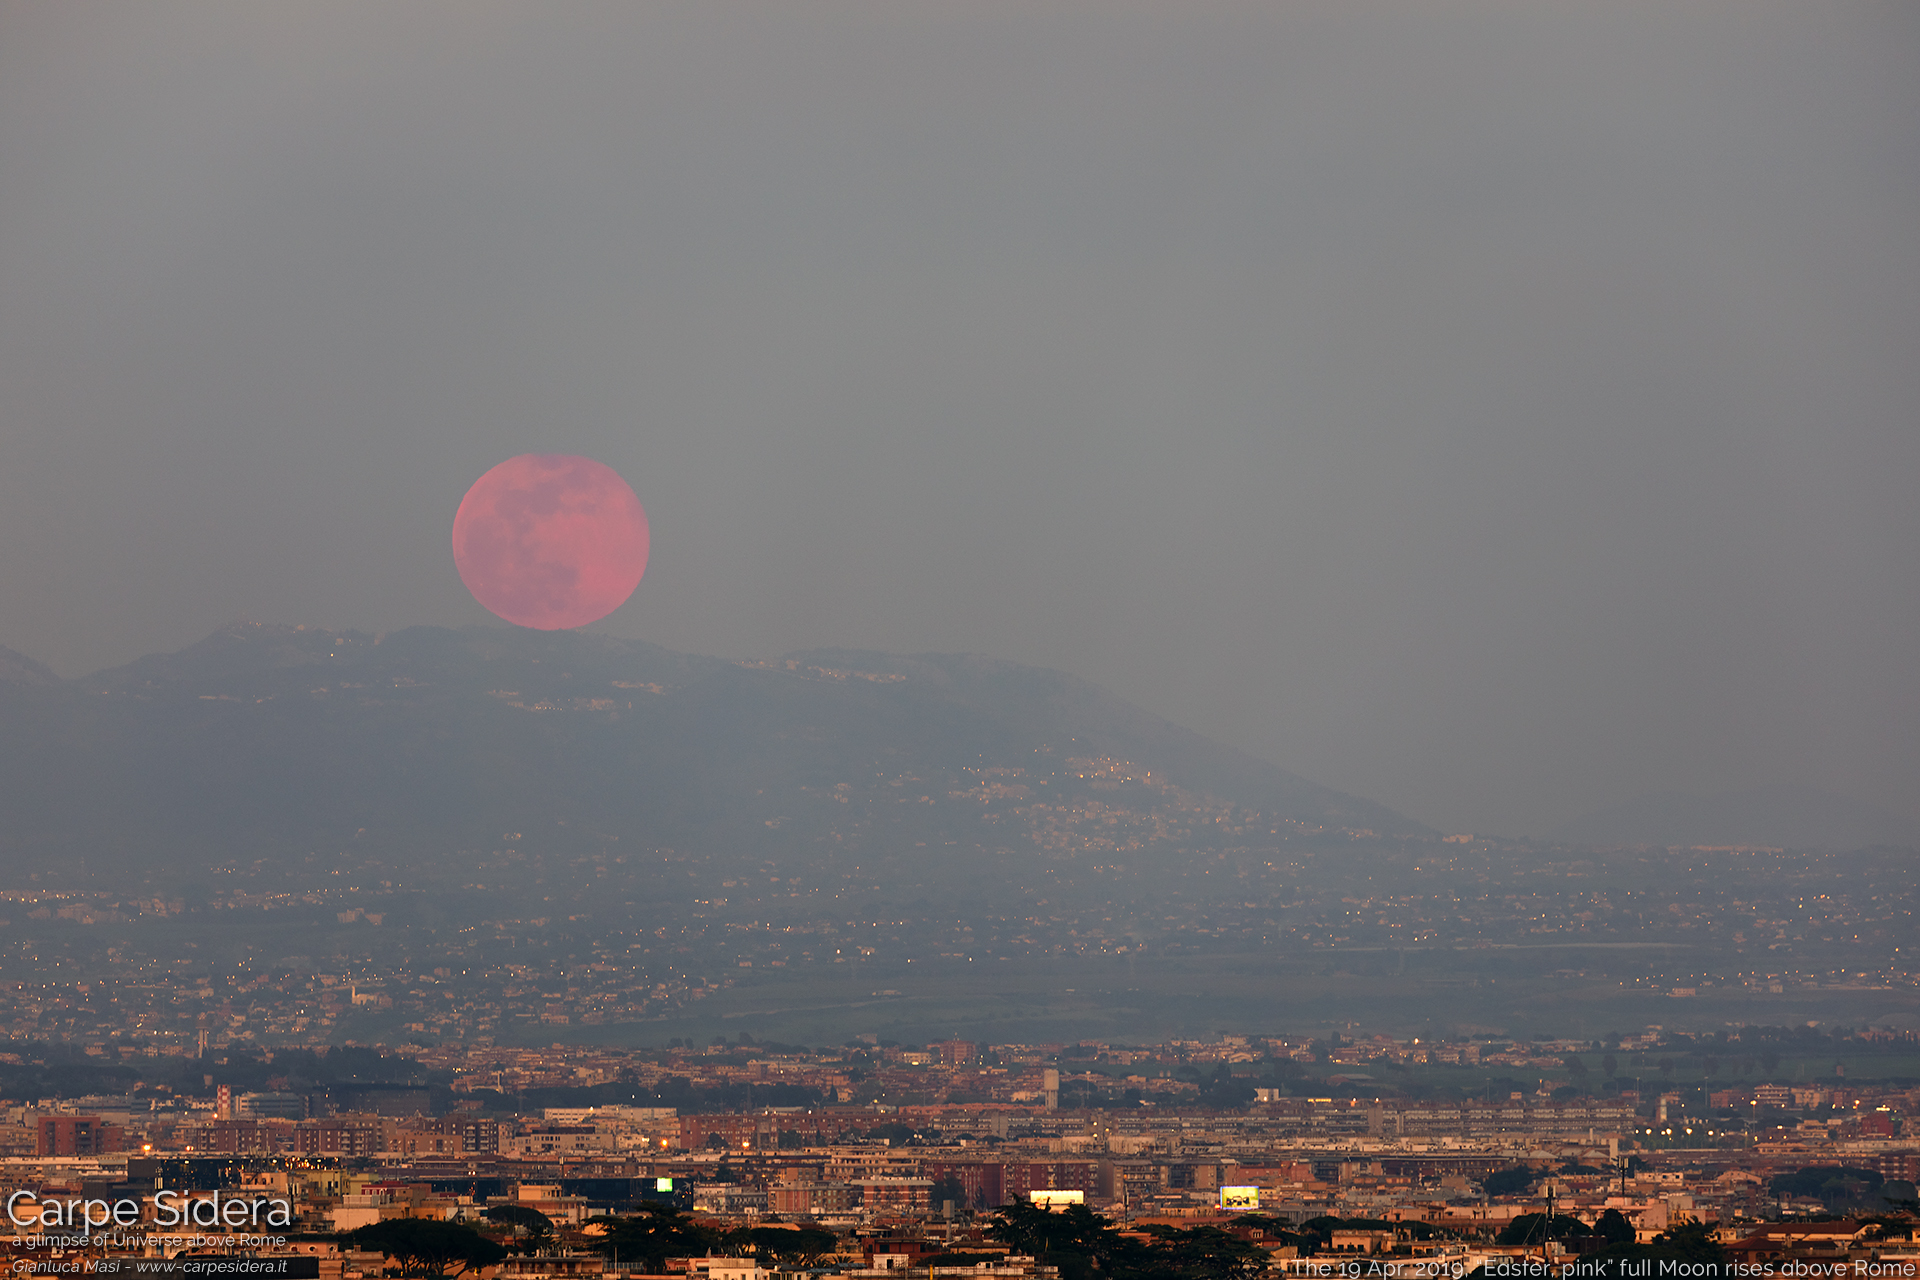 The 19 Apr. 2019 full Moon rises soon after sunset. Its "pink" color is a effect of our atmosphere